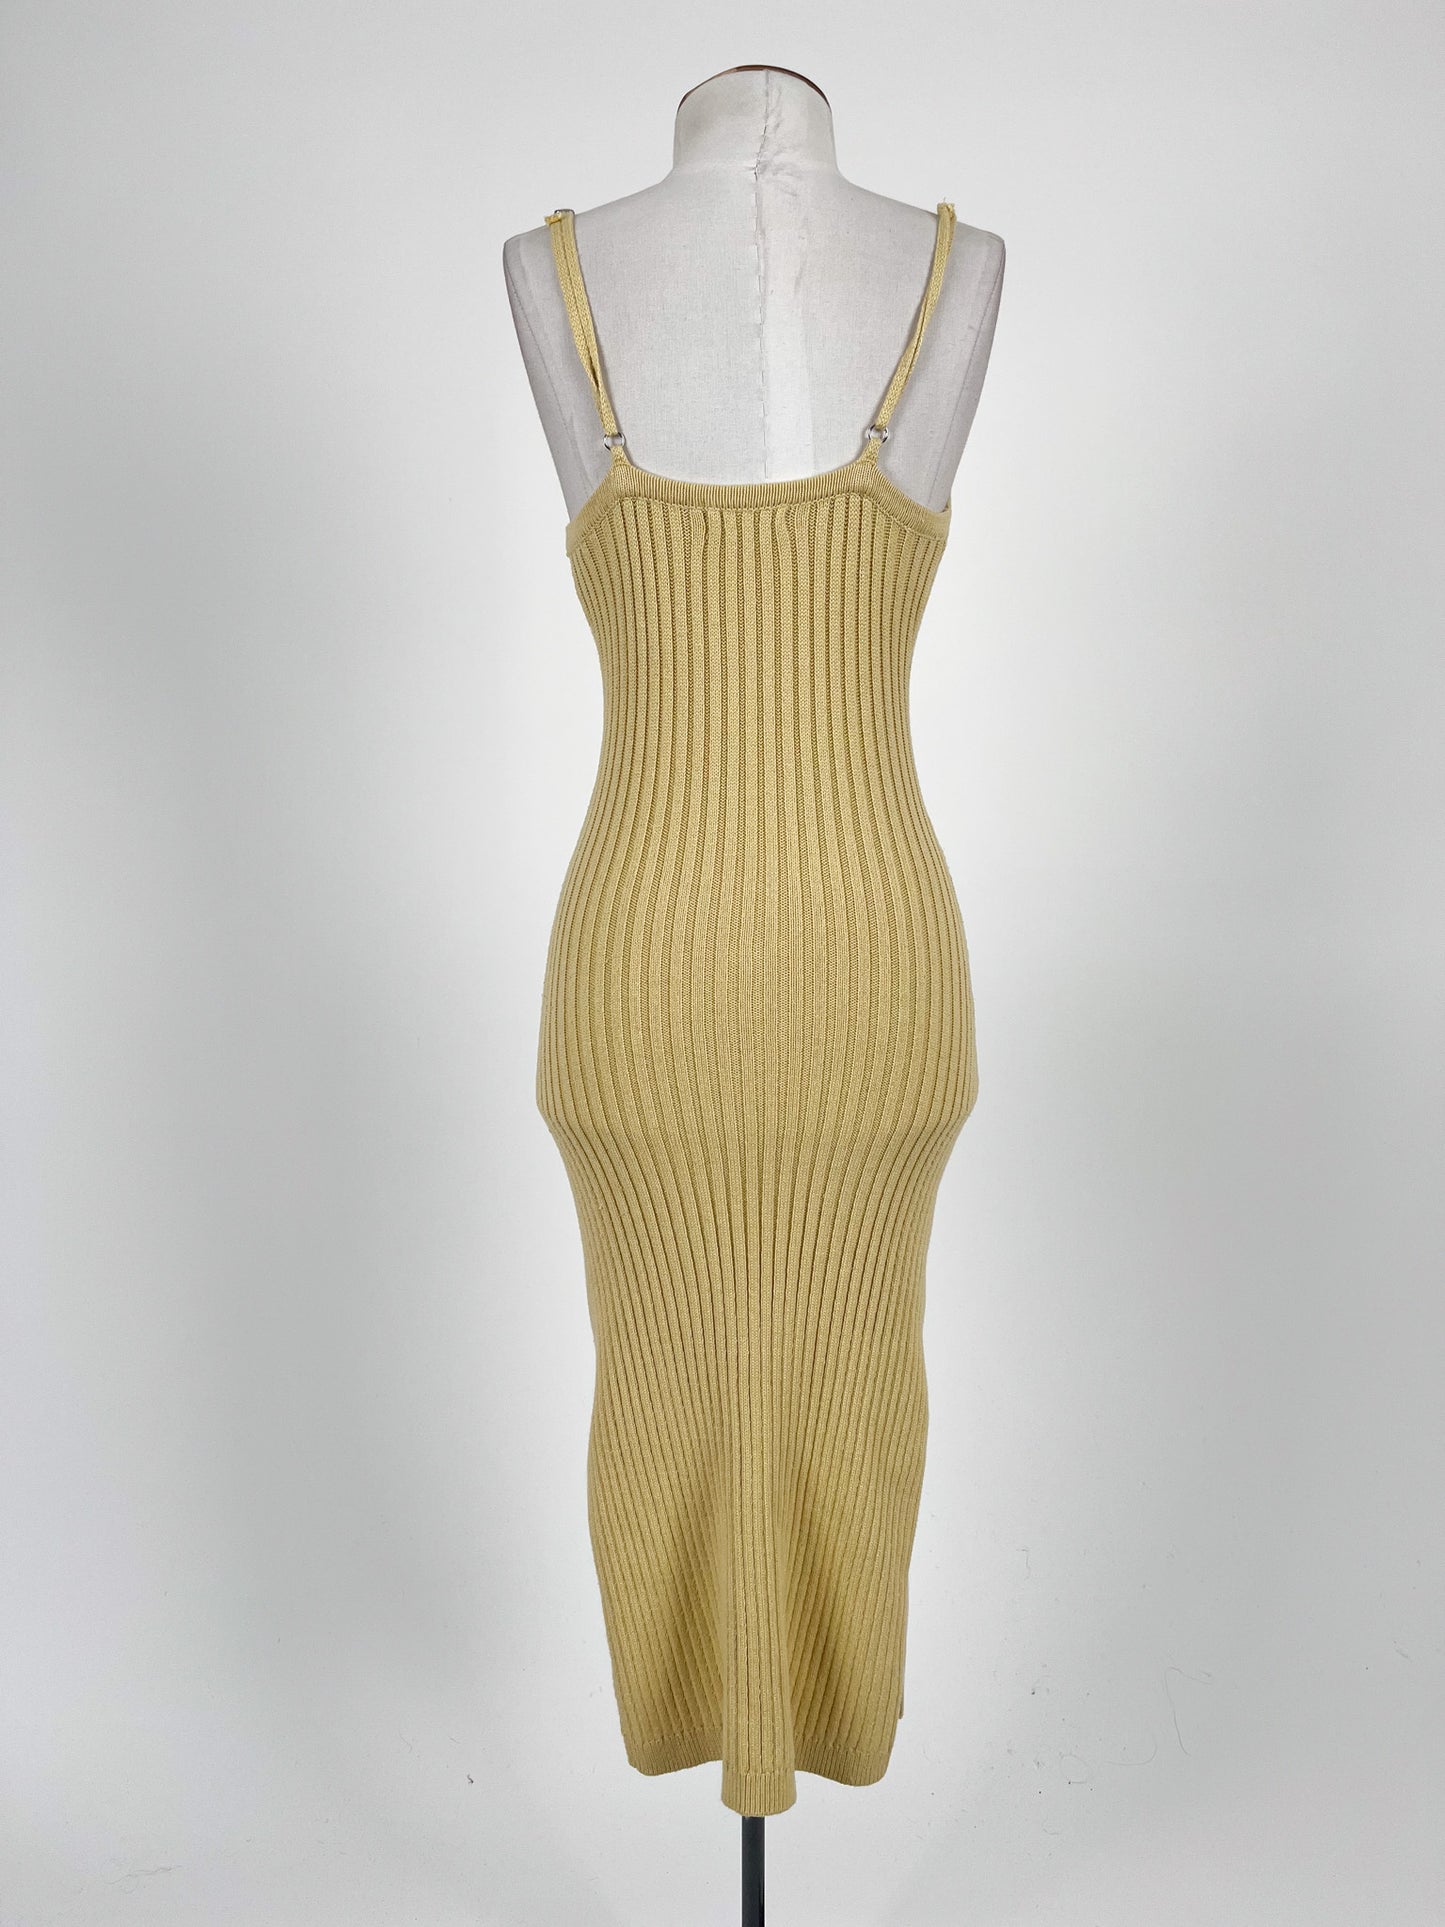 Glassons | Yellow Casual/Cocktail Dress | Size XS